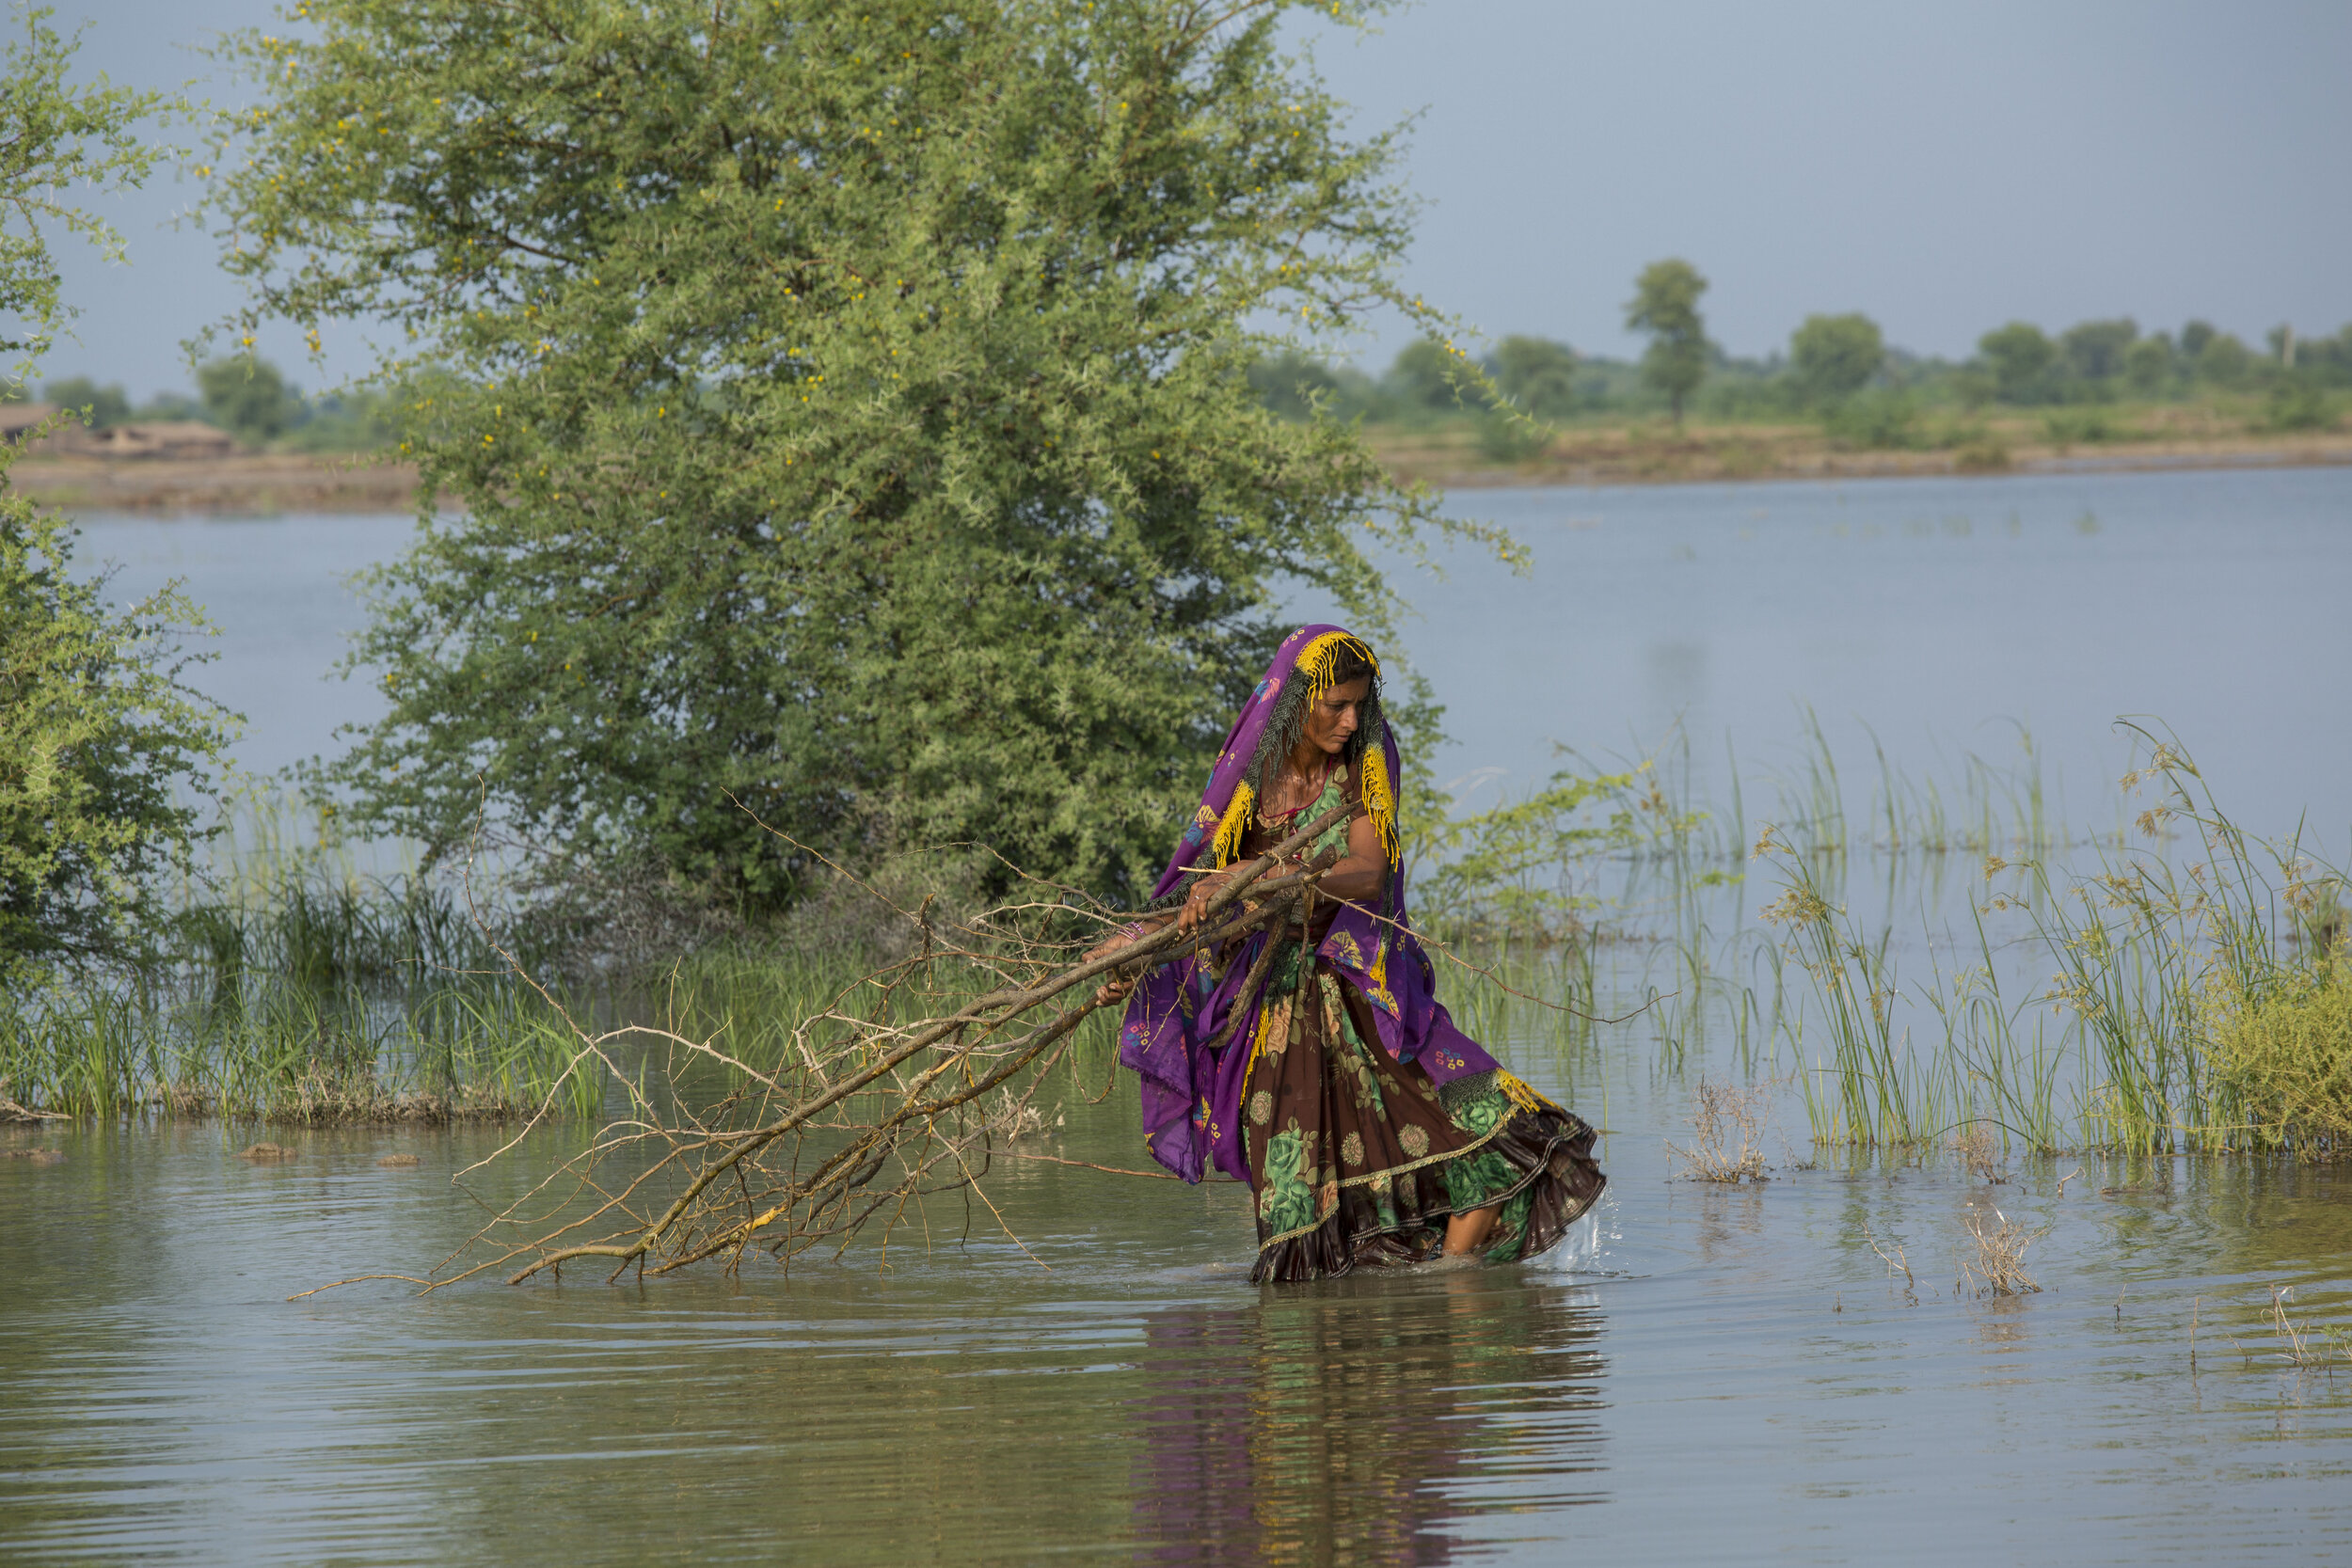  Surta crosses the flood water carrying wood for cooking as she now lives along the highway out in the open.  